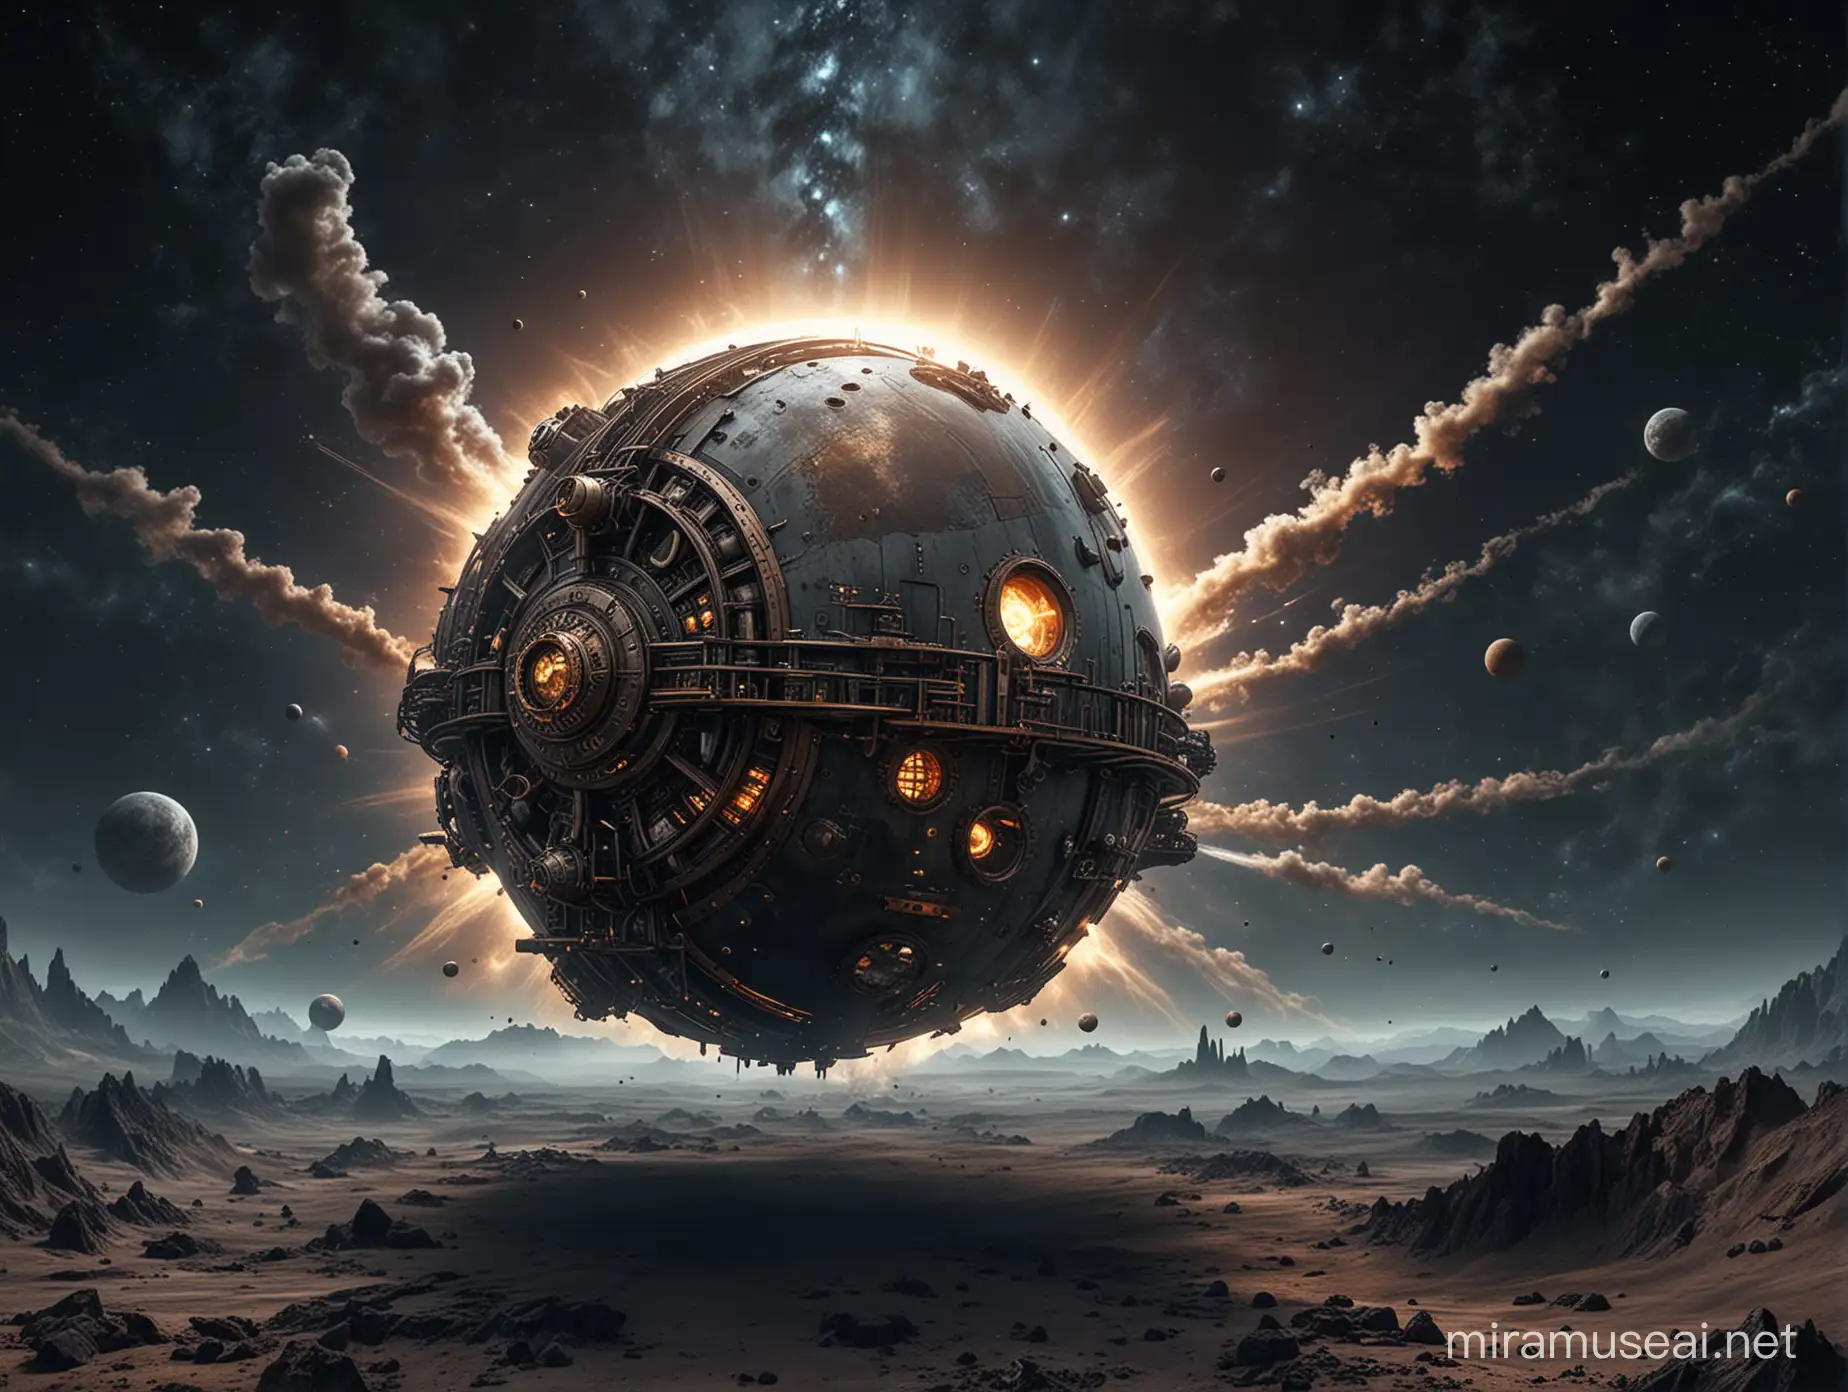 A Planet Made Of Metal And Steam In Vast Blank Space, Steampunk, Fantasy Theme, Astrology, Detailed, 3D Photo, High Resolution, Grim, Space Background, Dark Background, Blank.